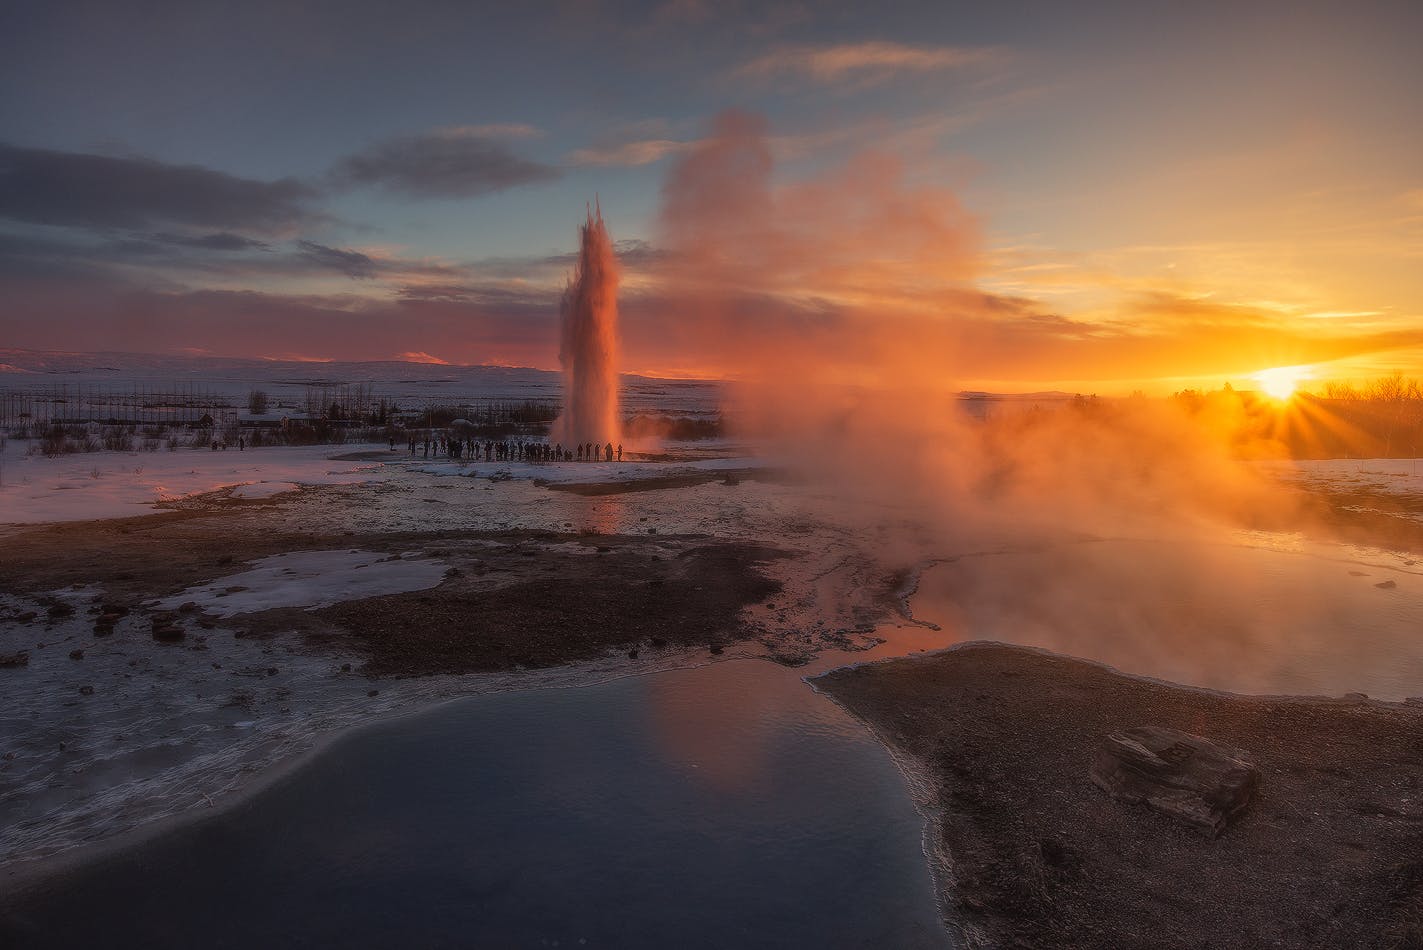 Strokkur blasting out boiling water at sunrise.